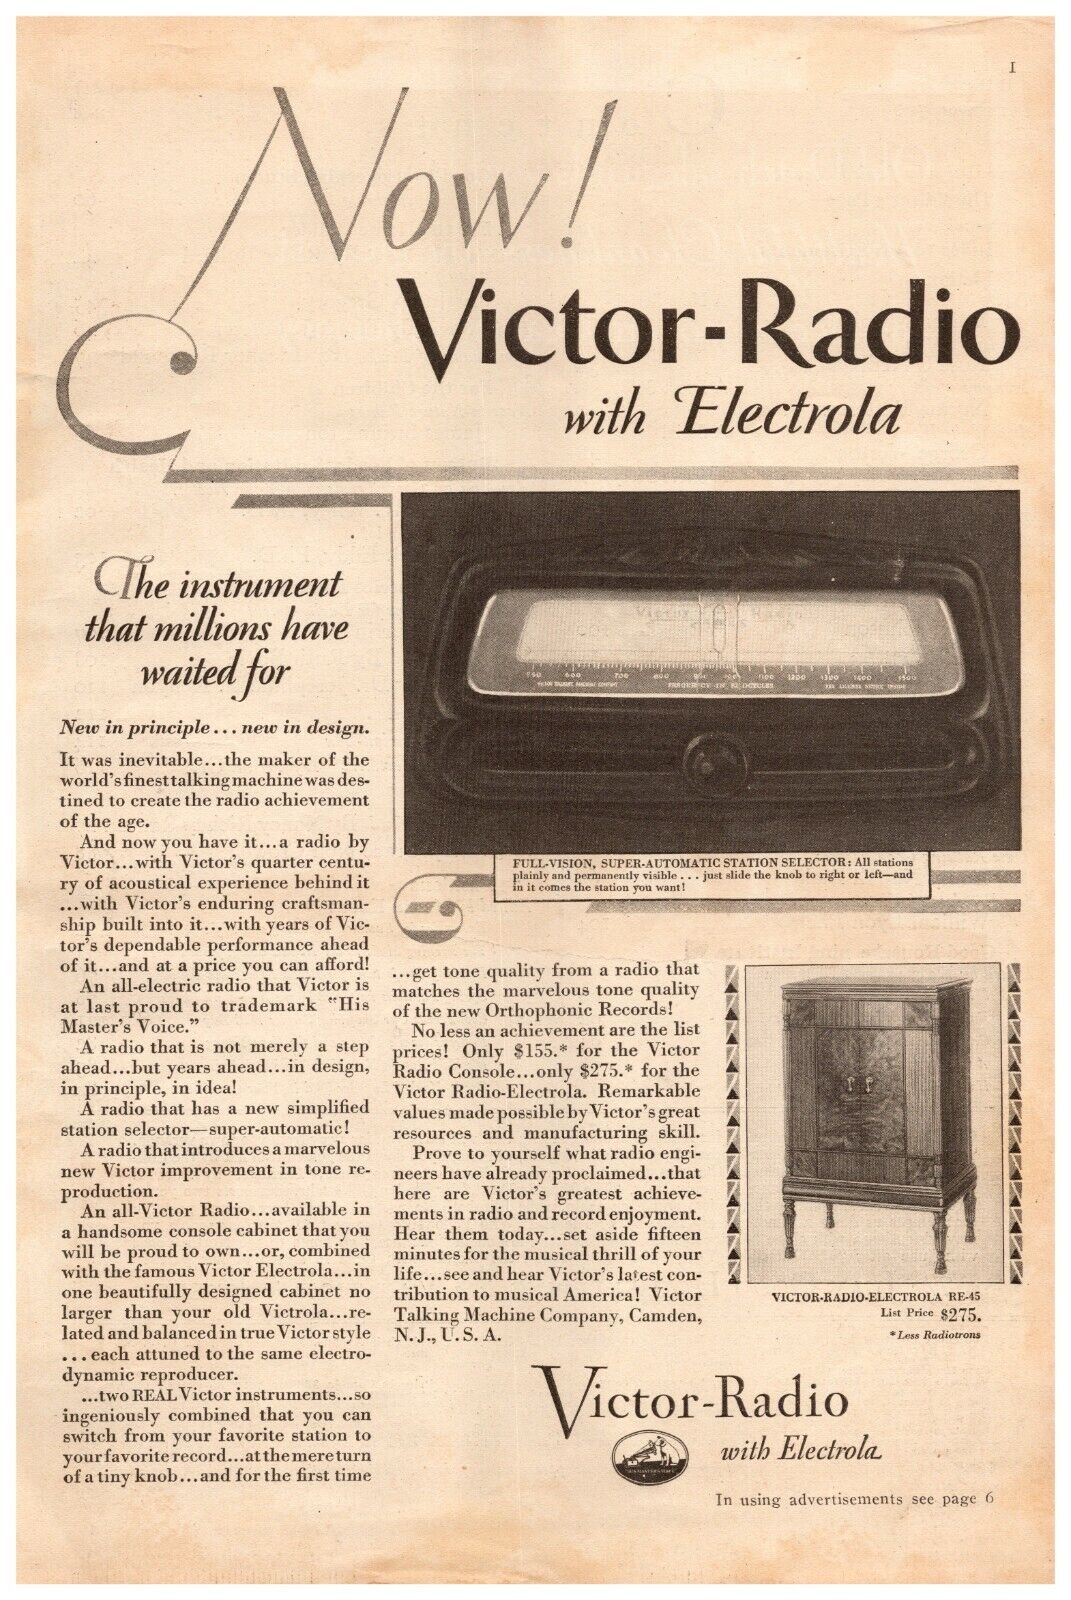 1929 Victor Radio Vintage Print Ad With Electrola The Instrument Millions Waited